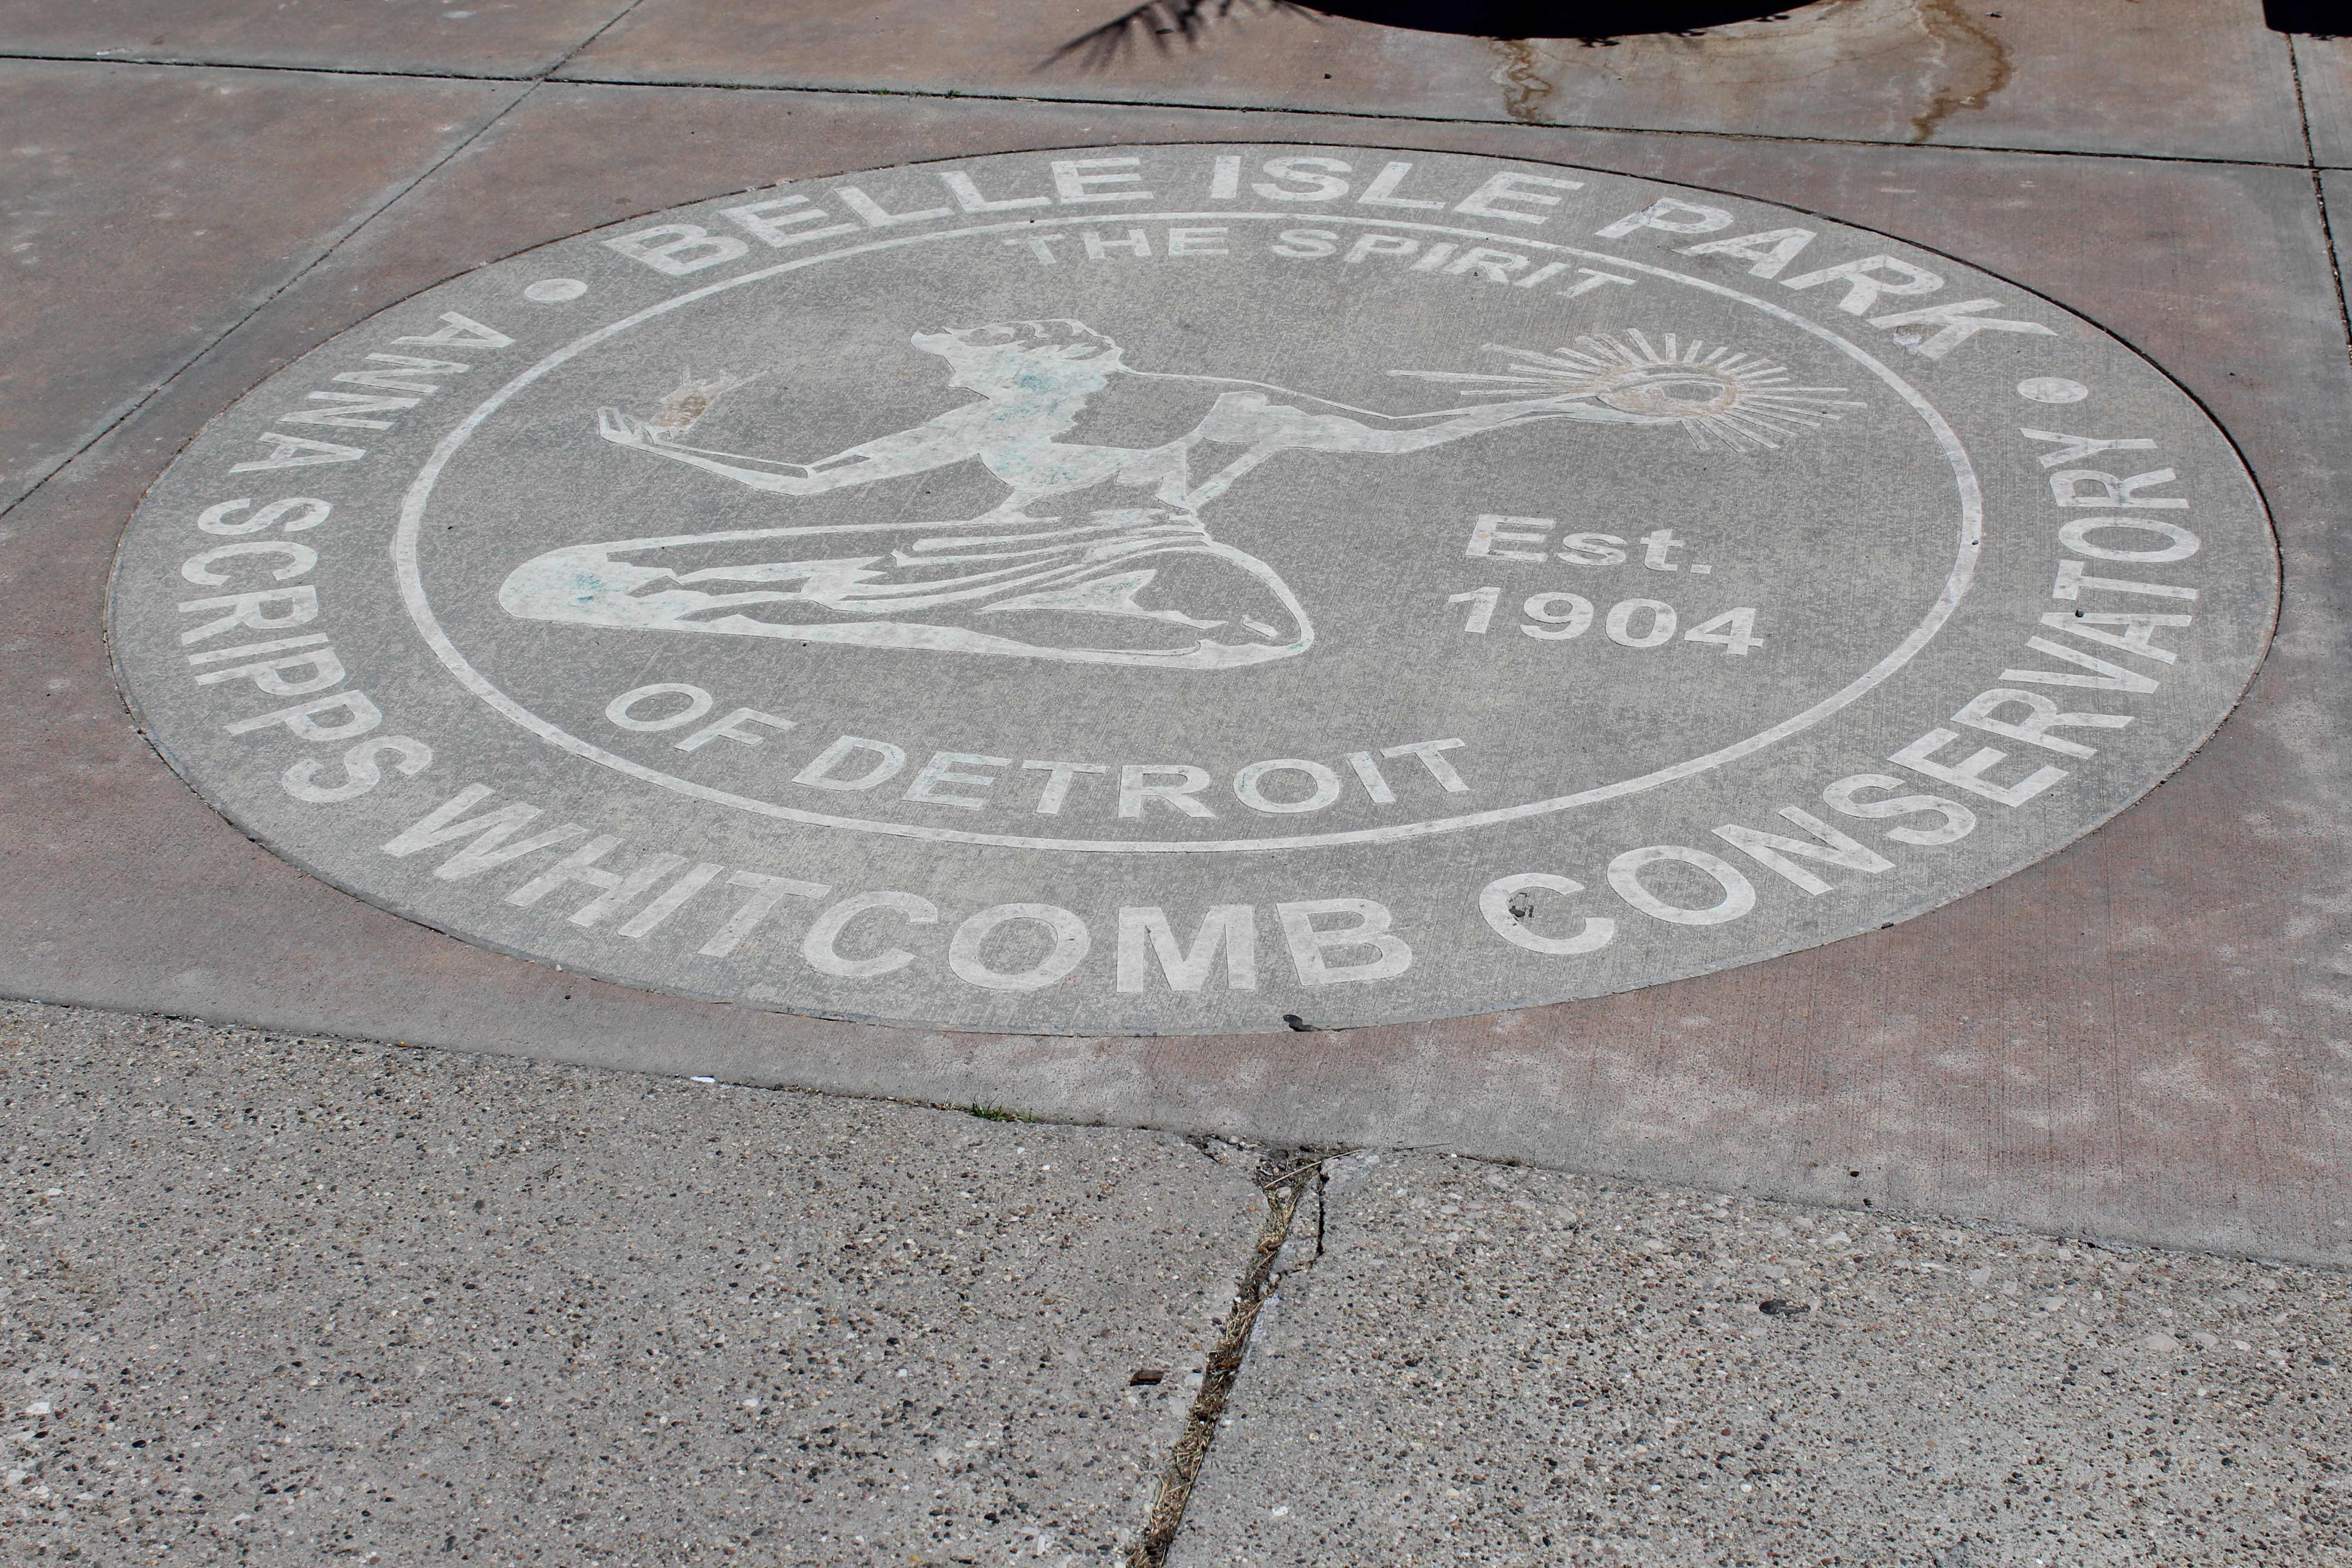 Engraving of historical marker in the cement on the ground at the entrance for Belle Isle Conservatory, founded in 1904.